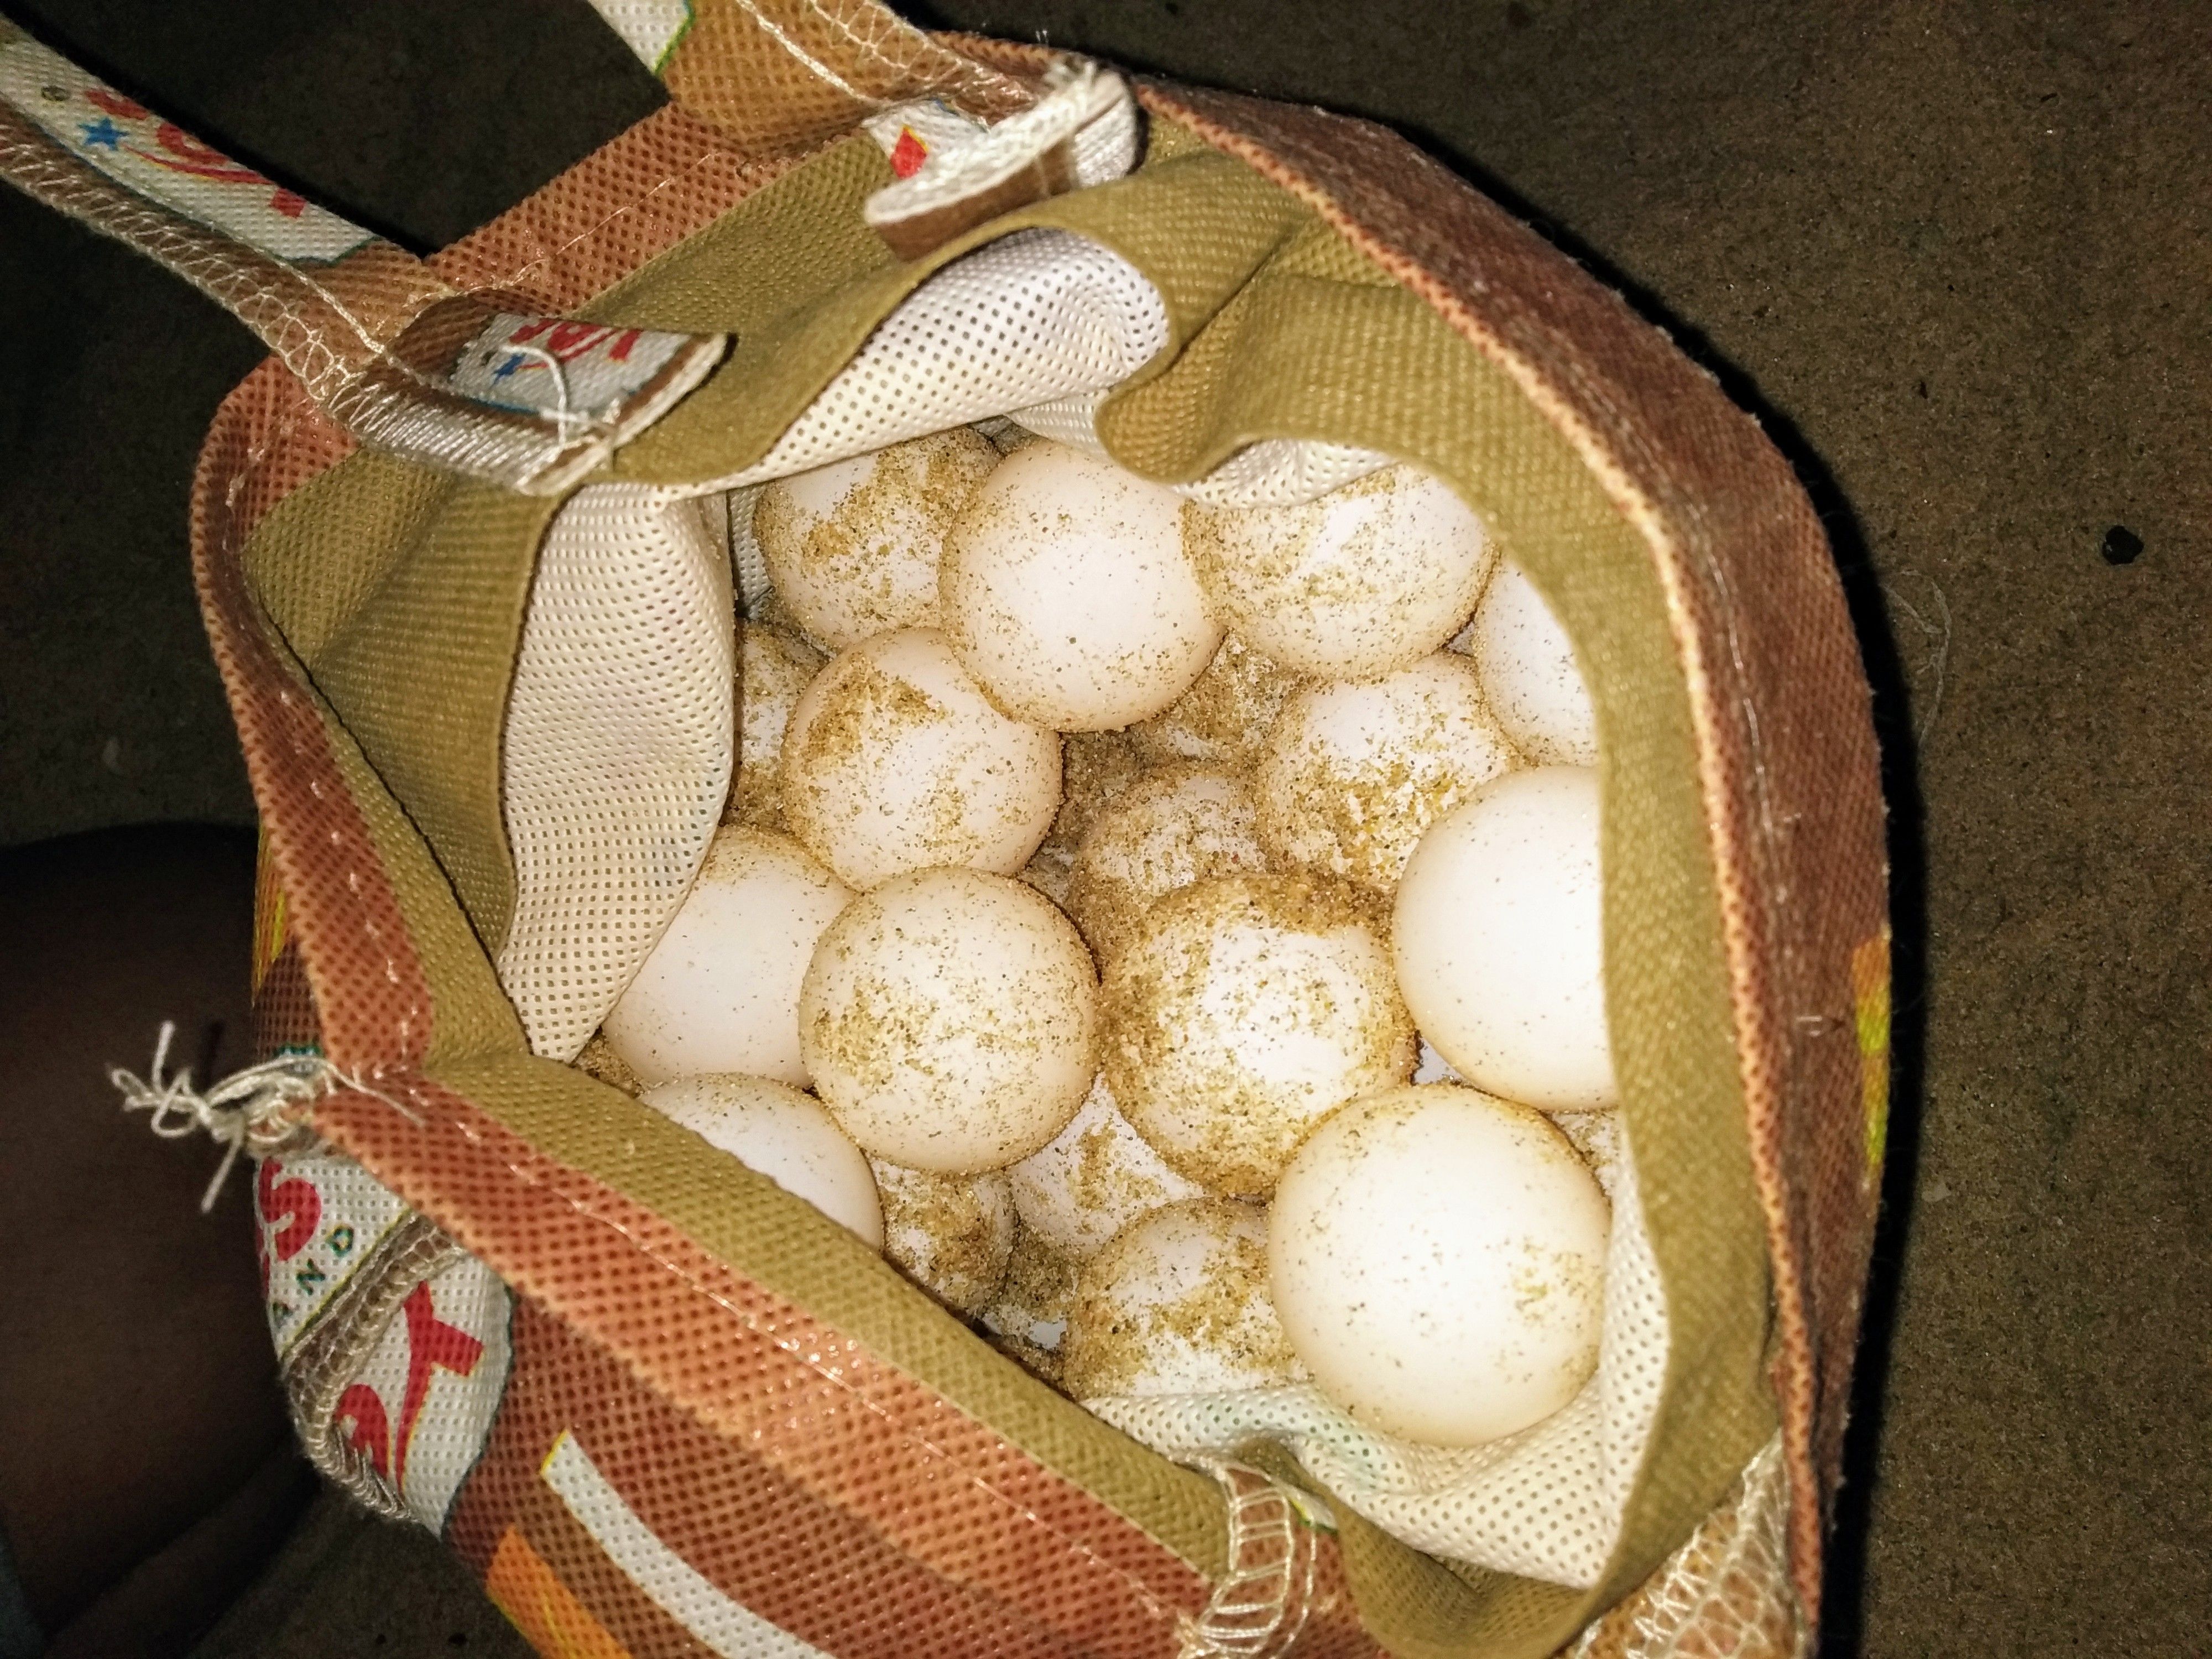 123 Olive Ridley sea turtle eggs collected and will be shitted to a safer place